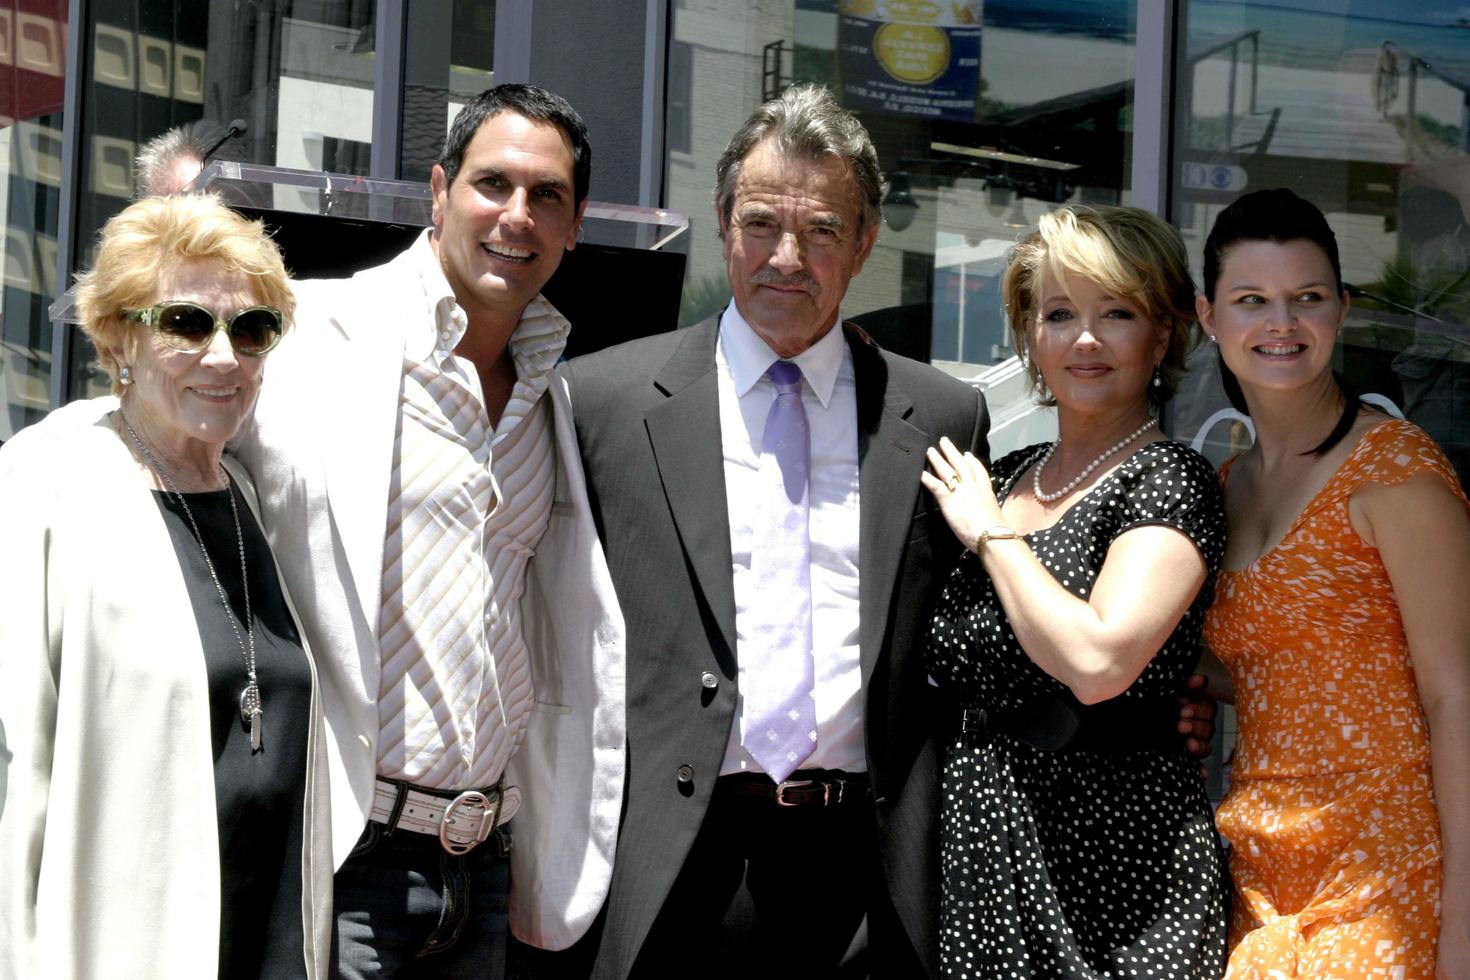 Jeanne Cooper, Don Diamonte,  Eric Braeden, Melody Thomas Scott, and Heather TomEric Braeden receives a star on the Hollywood Walk of FameLos Angeles, CAJuly 20, 20072007 Kathy Hutchins   Hutchins Photo